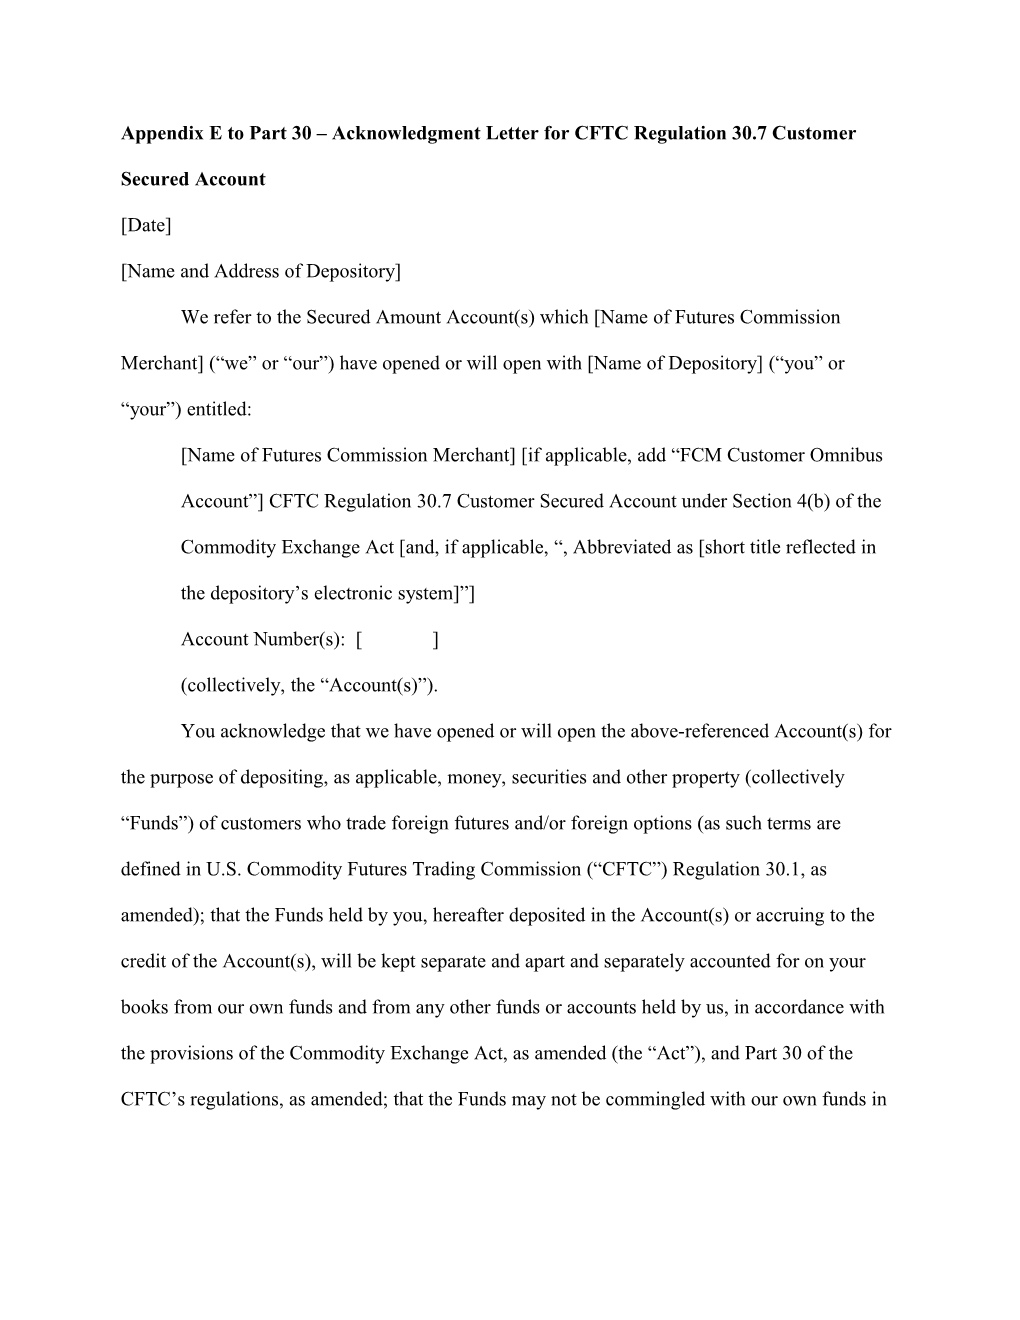 Appendix E to Part 30 Acknowledgment Letter for CFTC Regulation 30.7 Customer Secured Account